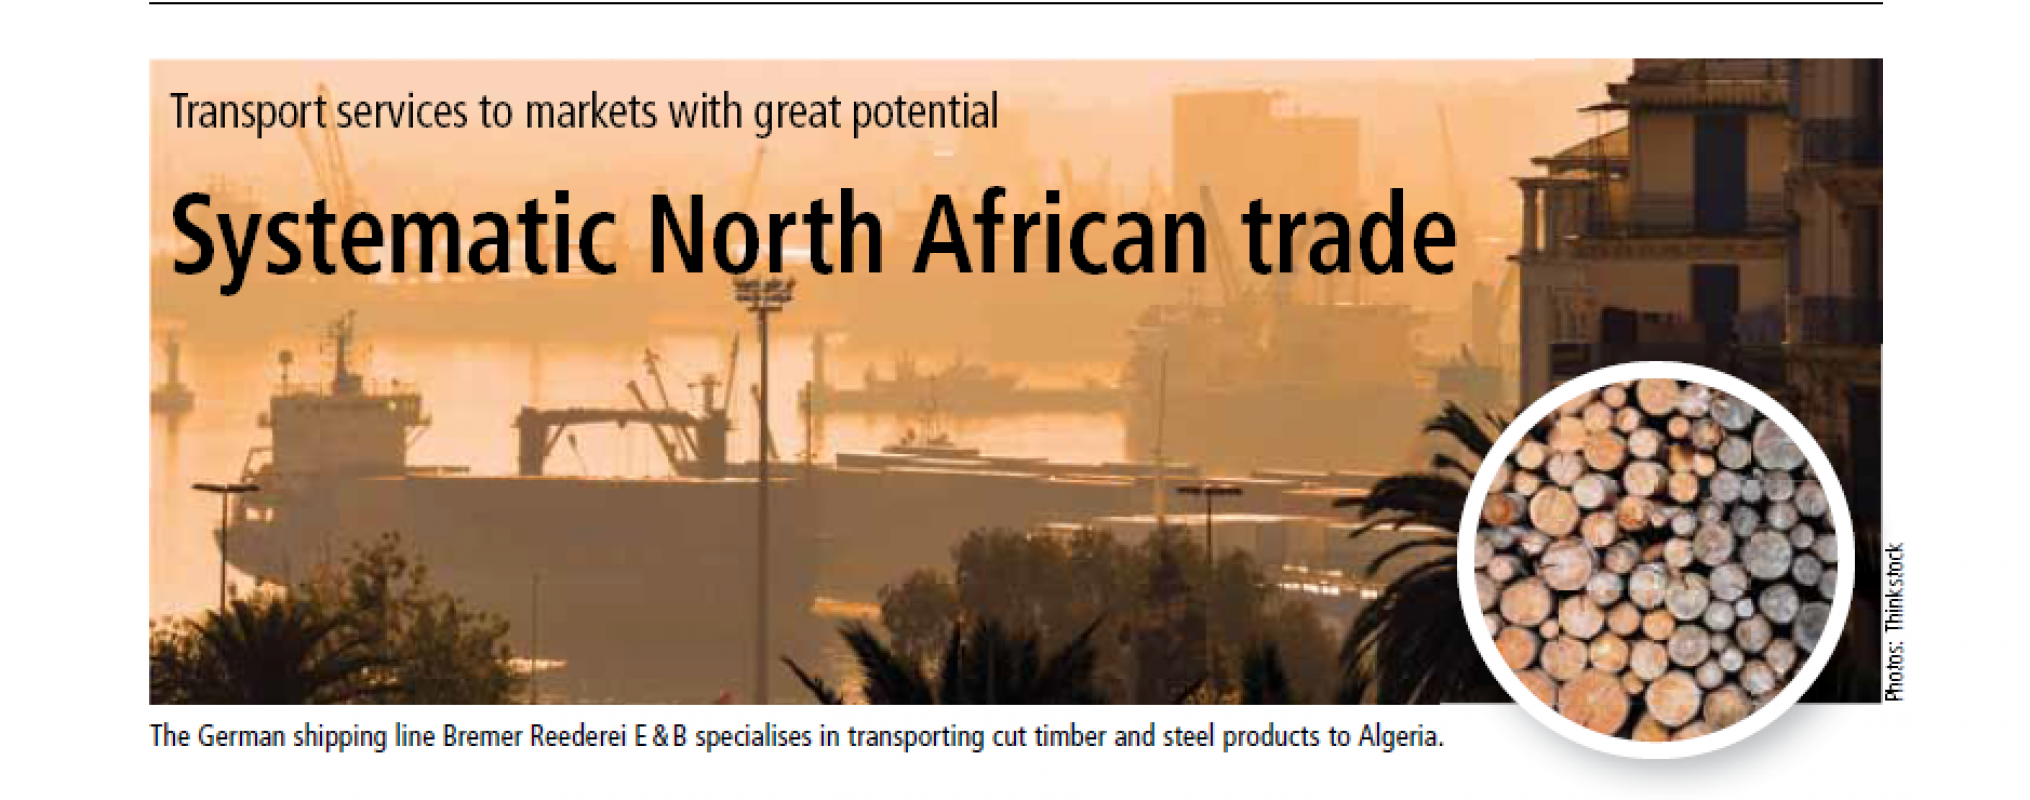 Systematic North African trade